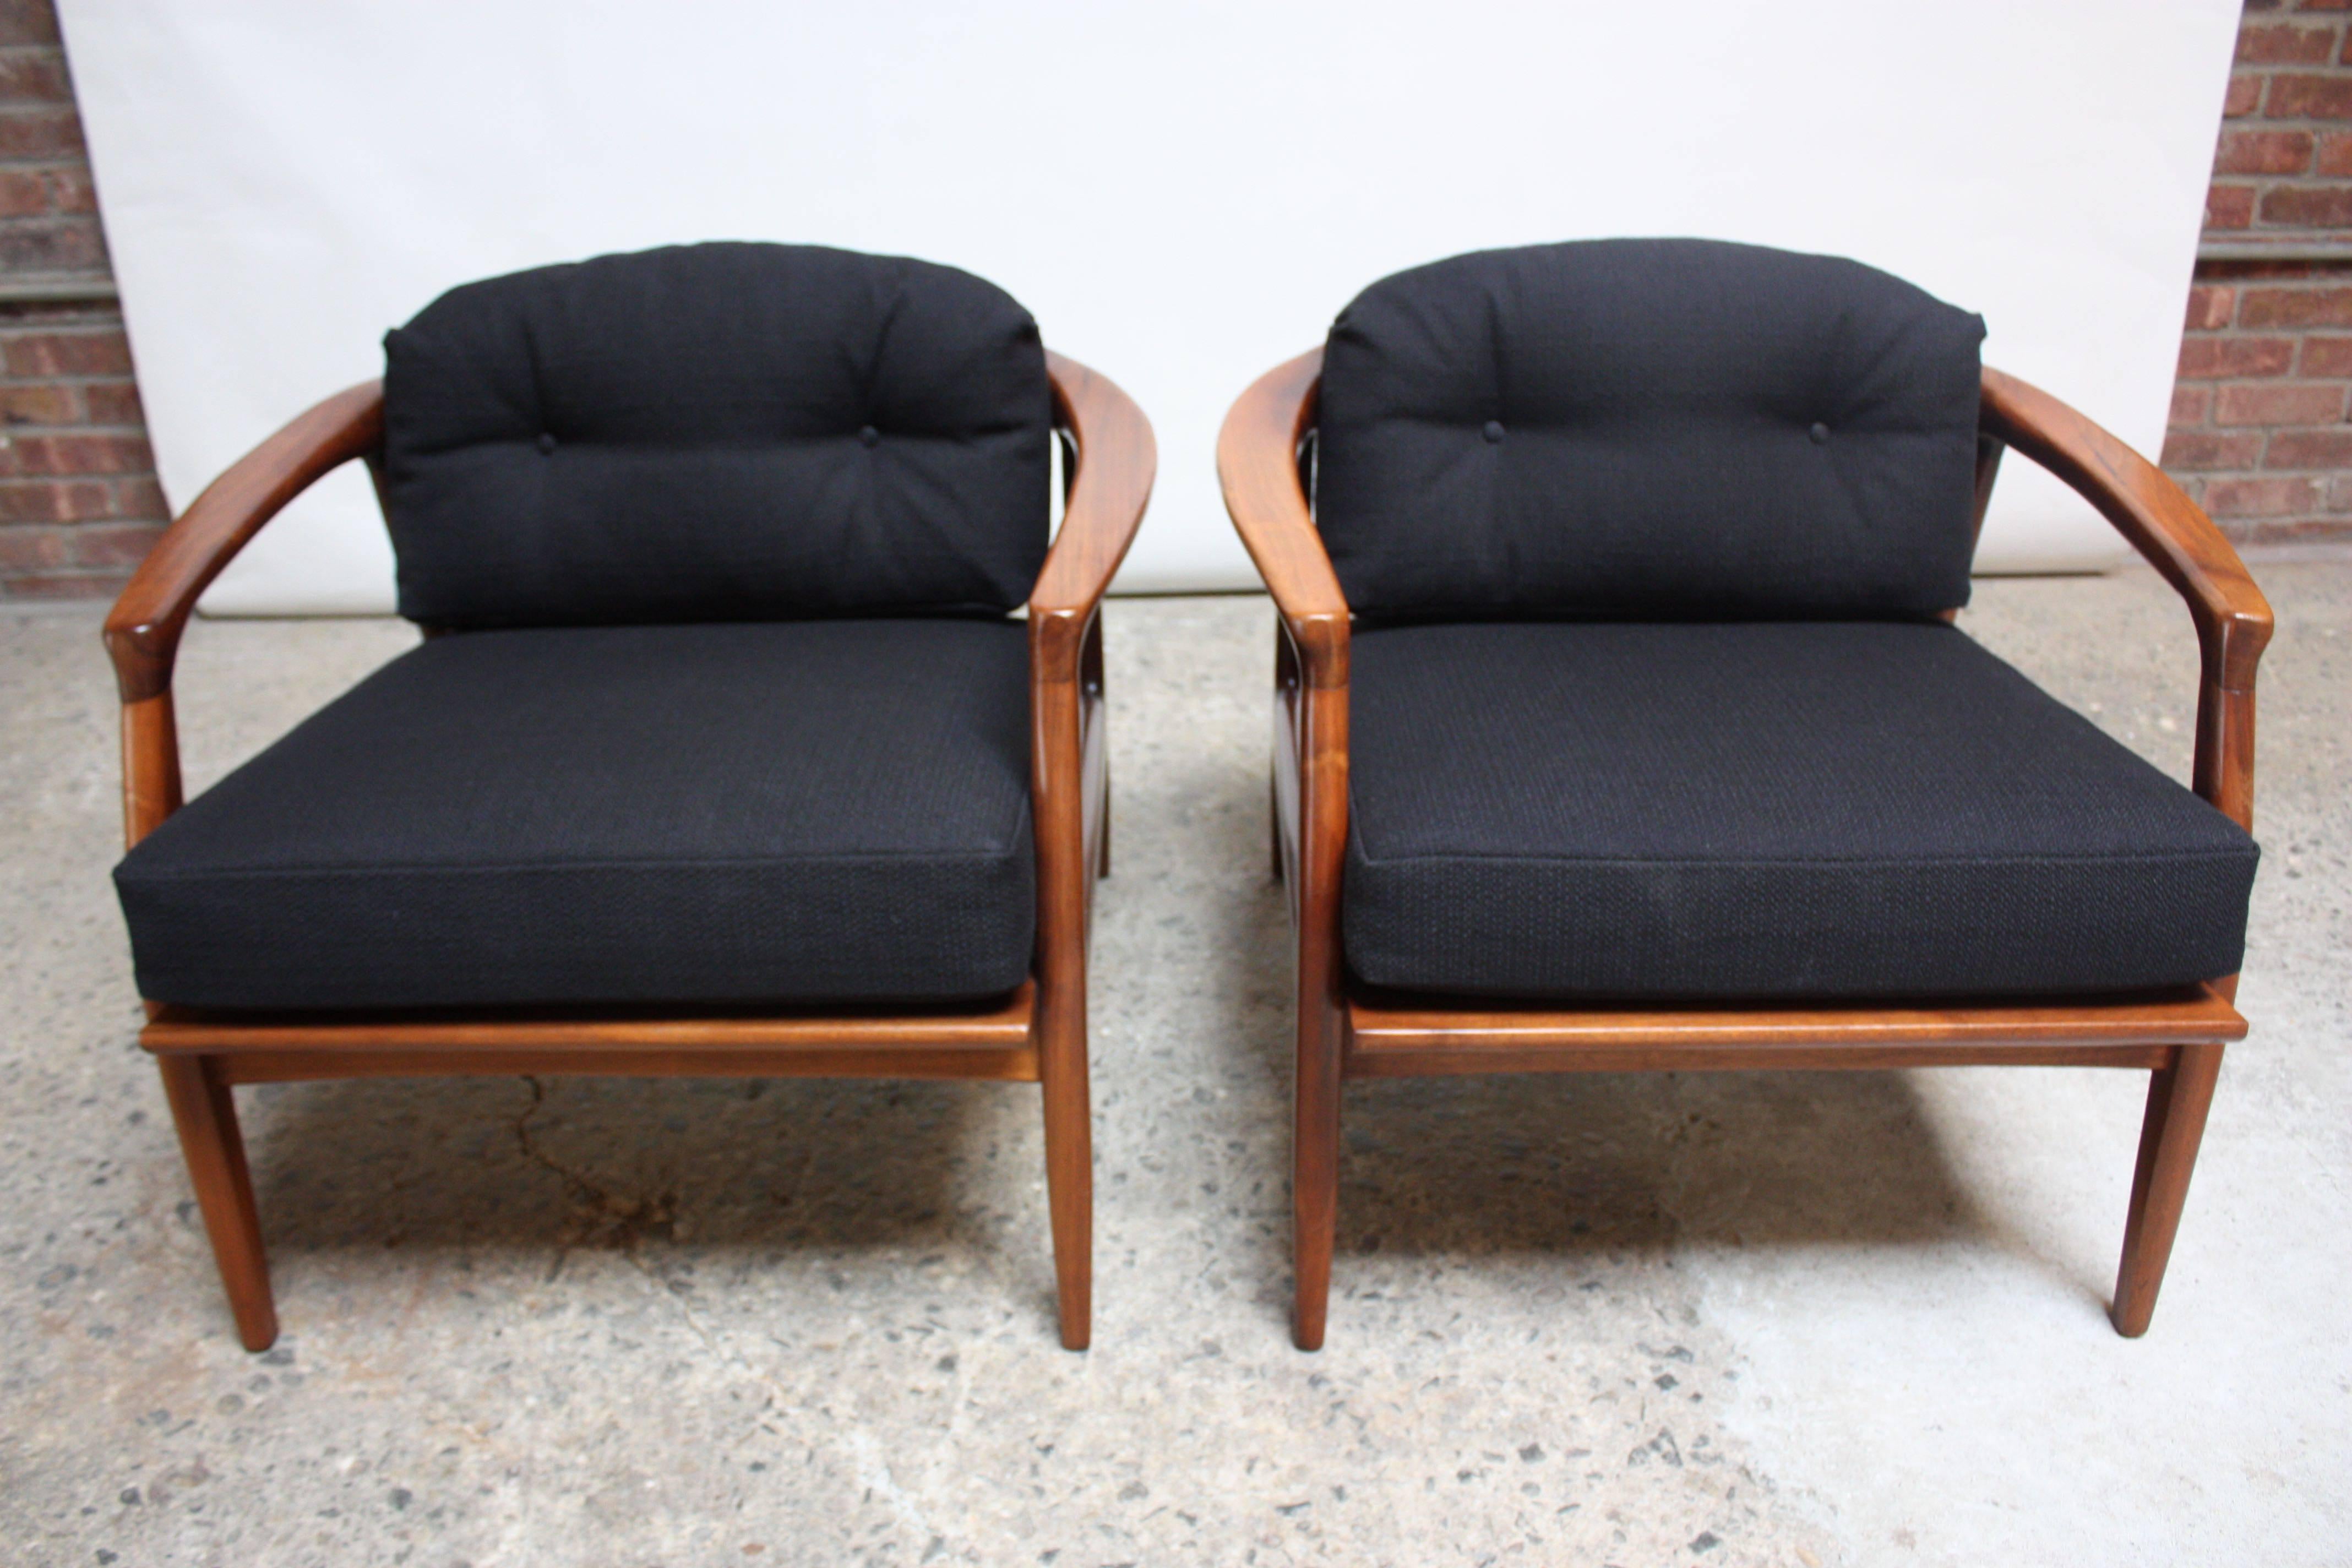 American Pair of Sculptural Walnut Lounge Chairs by Milo Baughman for Thayer Coggin